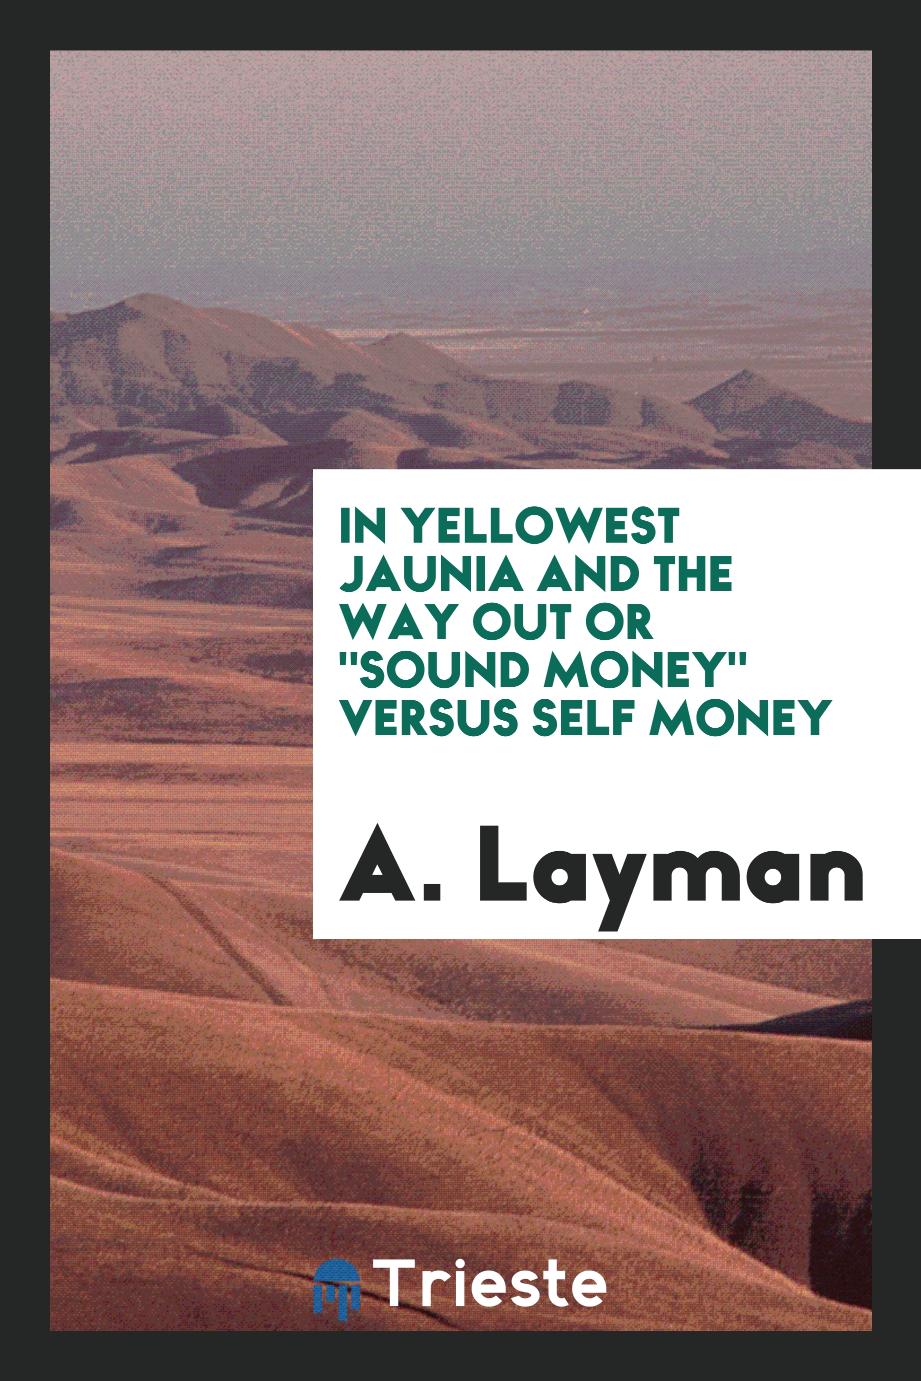 In Yellowest Jaunia and the Way Out or "Sound Money" Versus Self Money